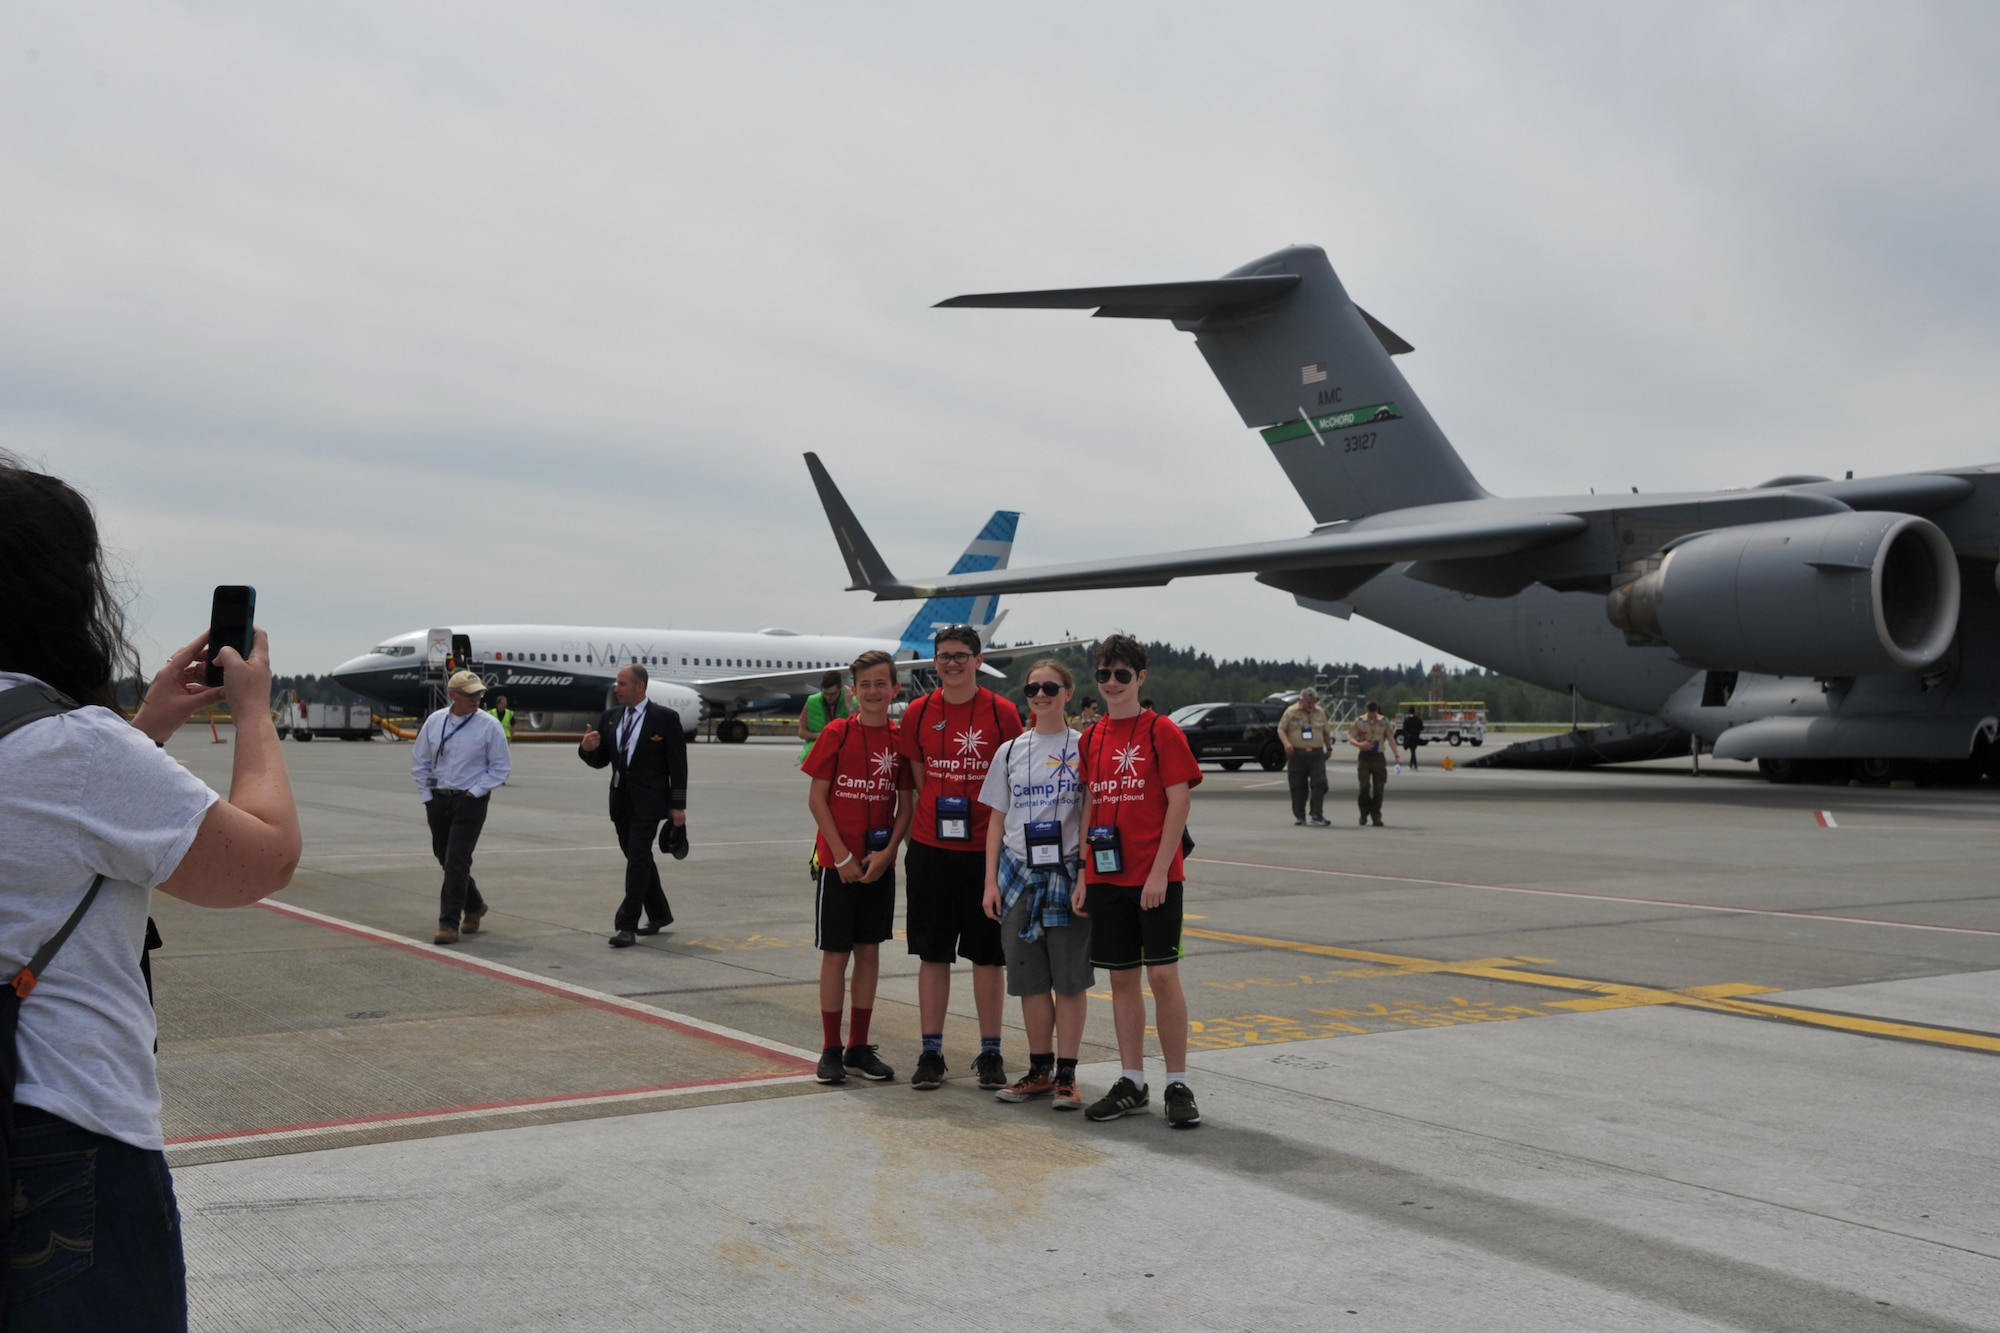 Stacy Cotton, chaperone, takes a photo of members of Robot Camperz, a co-ed group of Camp Fire Central Puget Sound, in front of the C-17 Globemaster III static display during the Alaska Airlines Aviation Day event May 5, 2018 at Seattle-Tacoma International Airport.